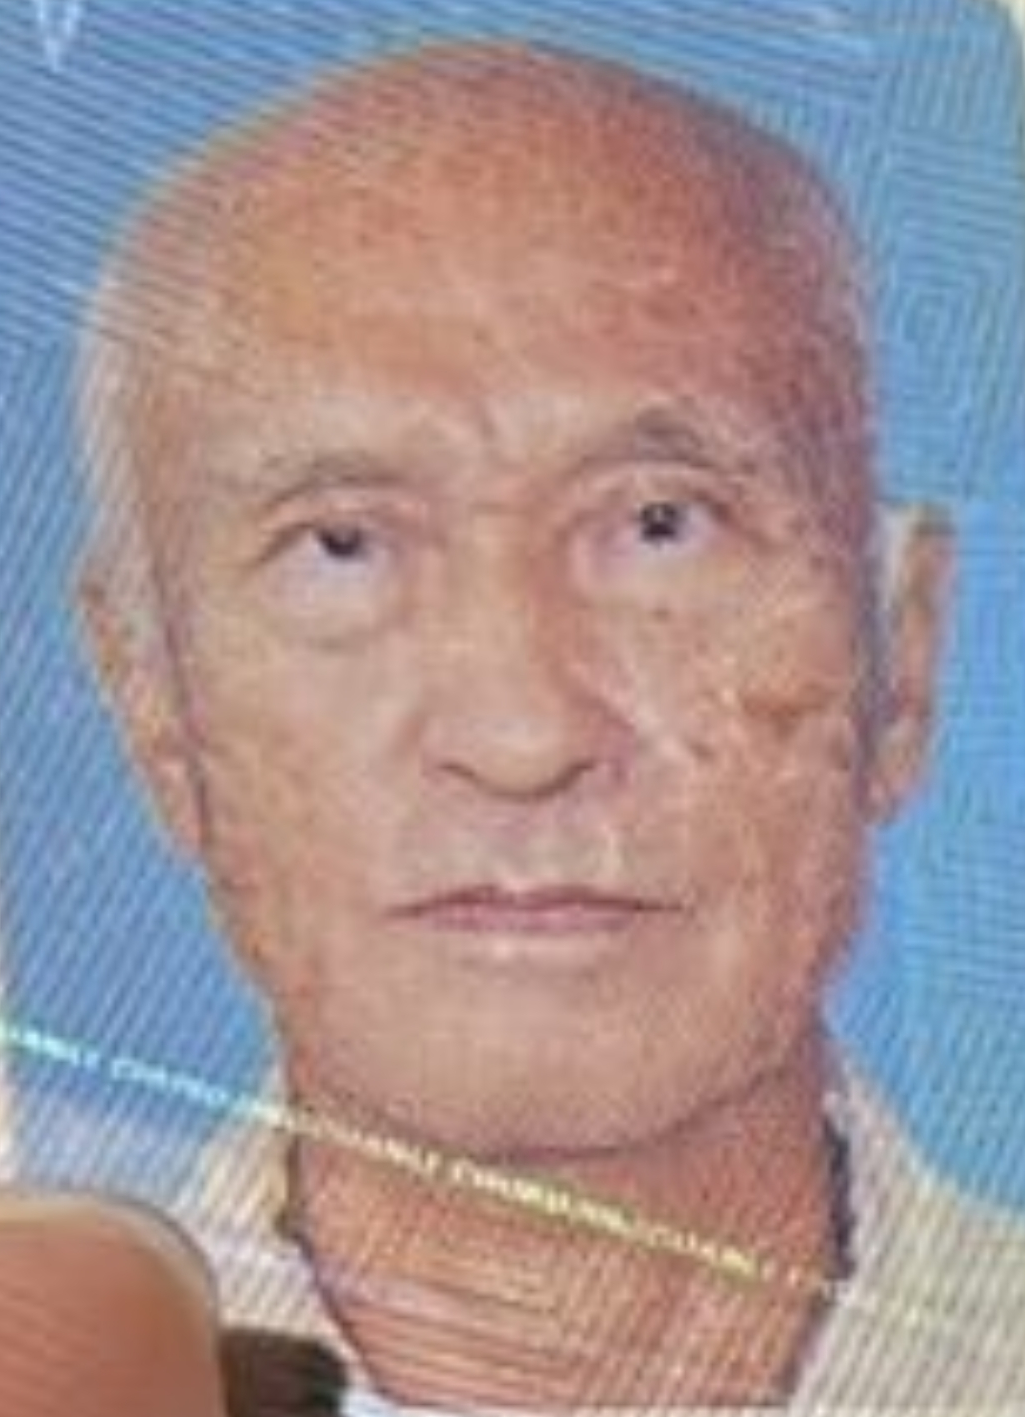 Chu Tan-pin, aged 78, is about 1.7 metres tall, 66 kilograms in weight and of thin build. He has a long face with yellow complexion and short white hair. He was last seen wearing a white tee, black trousers, brown shoes and carrying a blue bag.